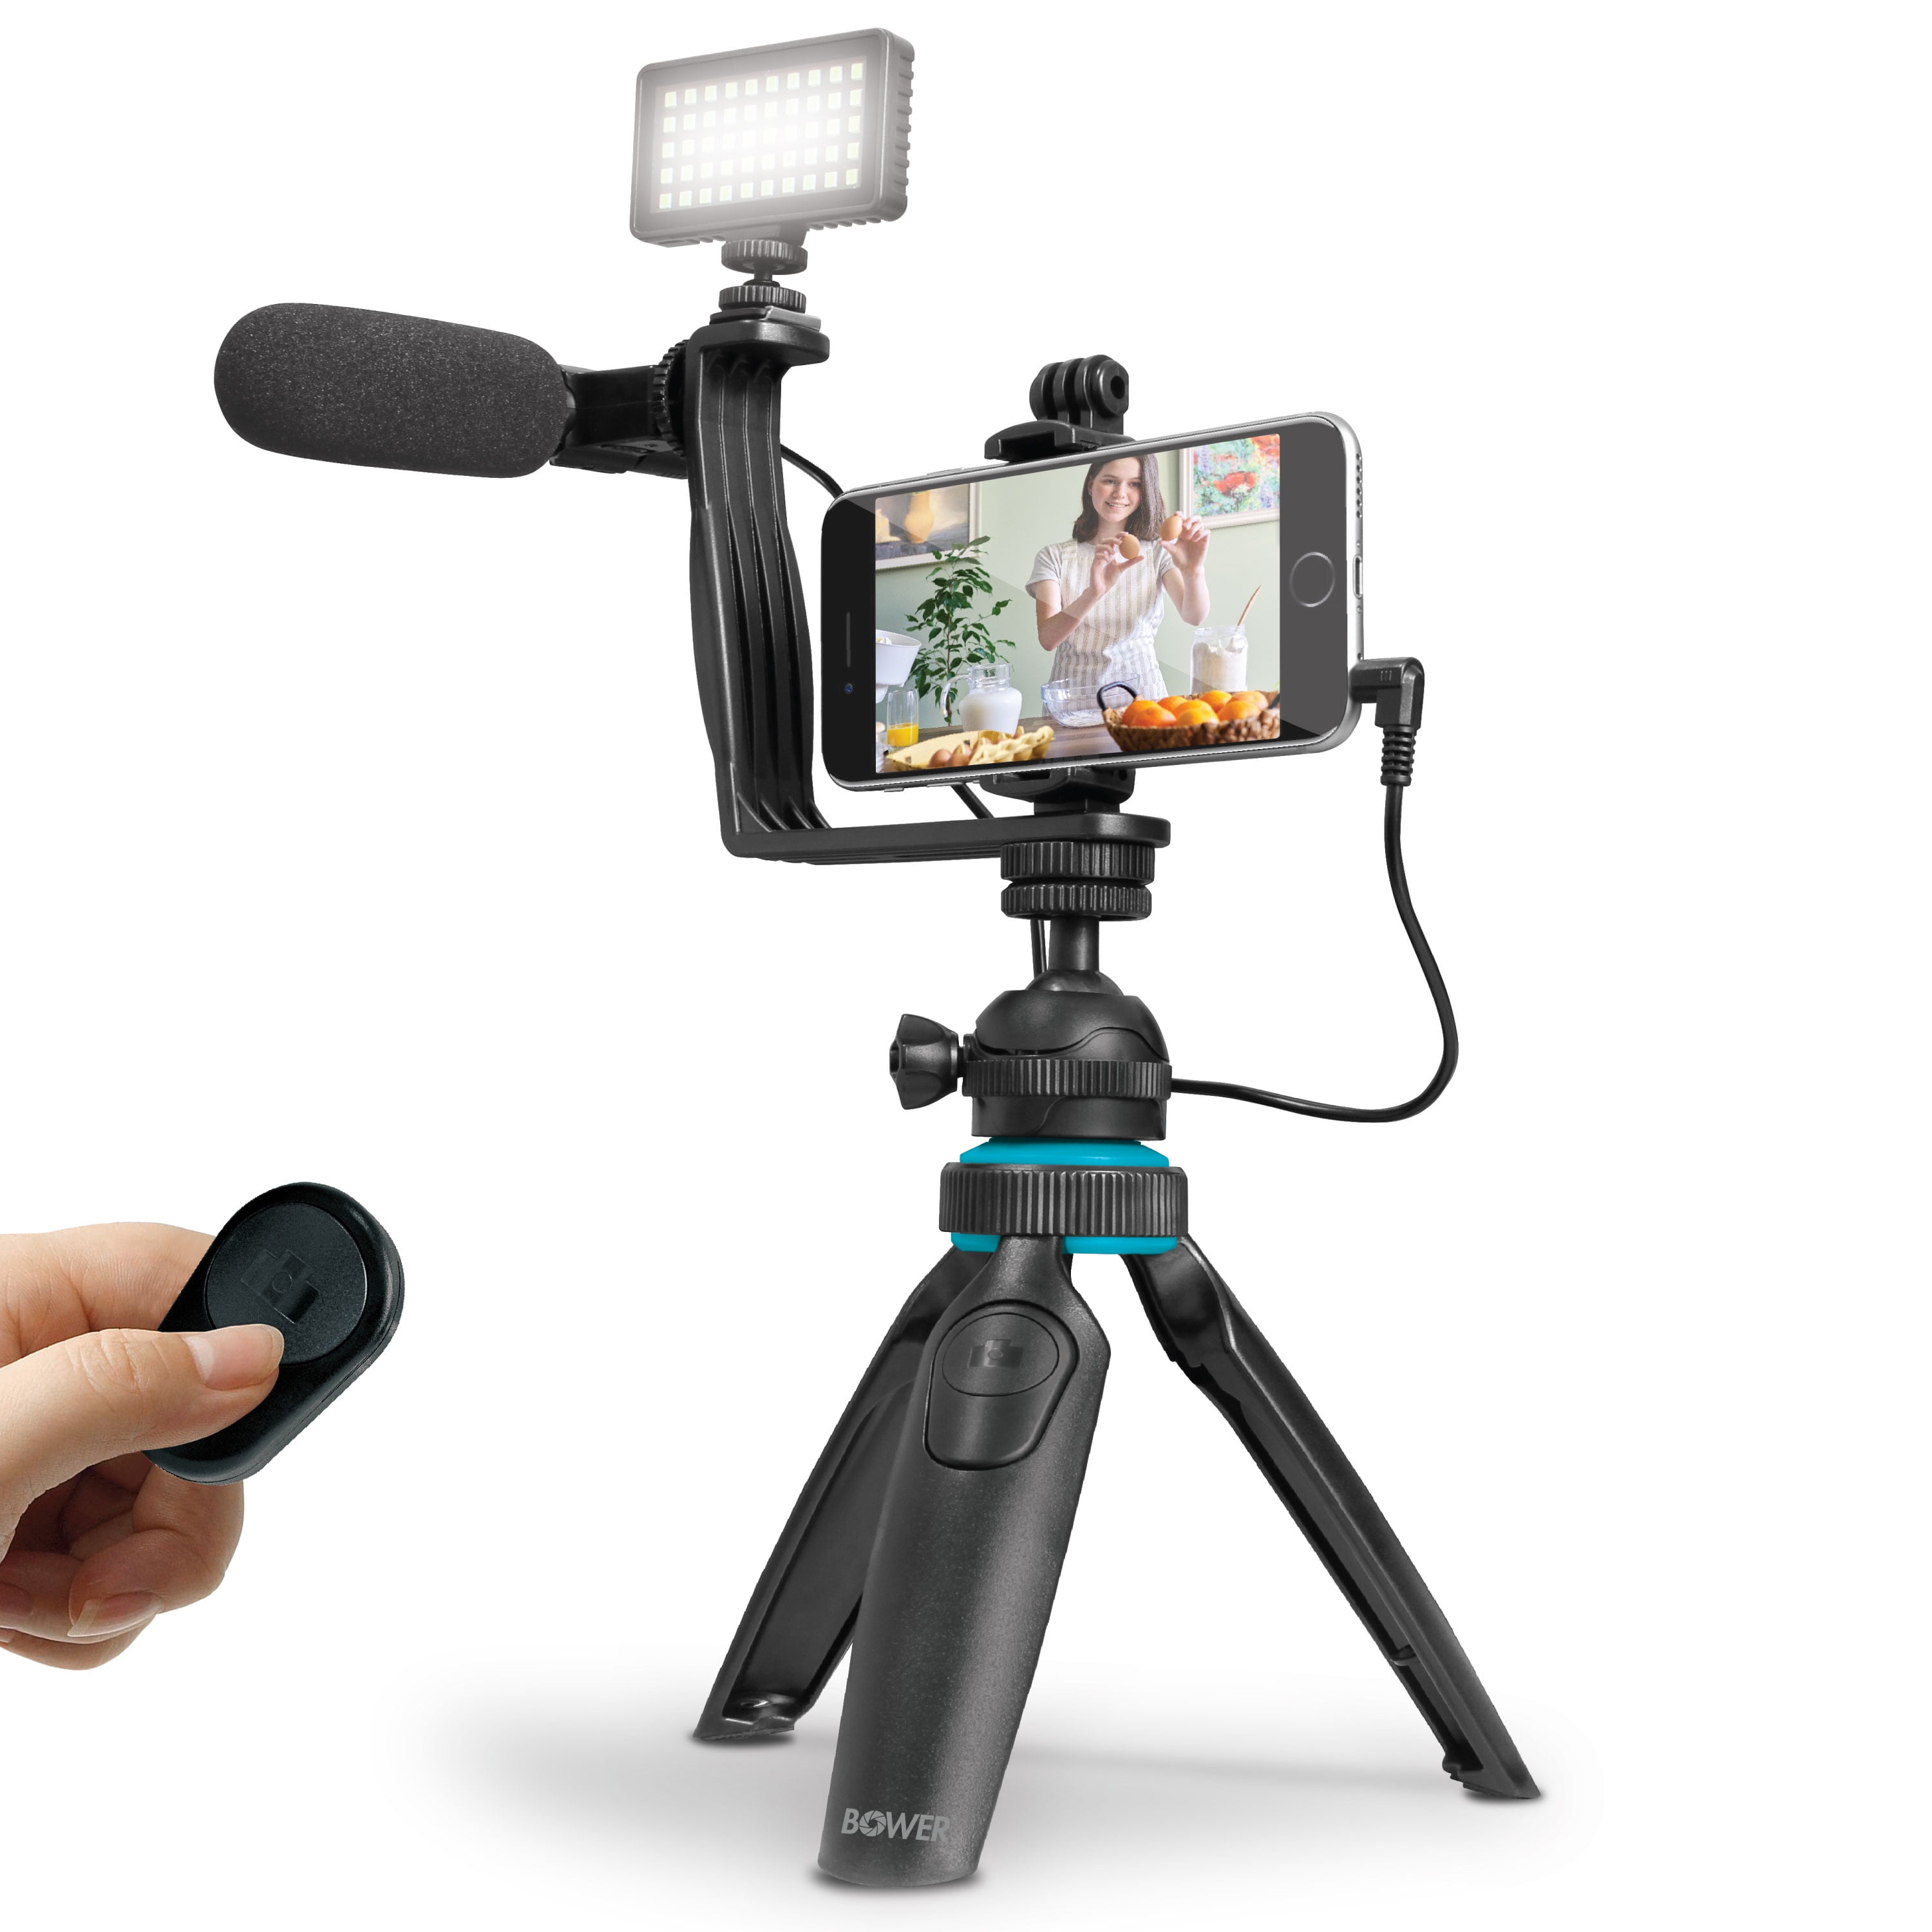 Bower Ultimate Vlogger Kit with 50 LED Light, HD Microphone, Bracket, Phone / Action Camera Mount, Shutter, and Tripod